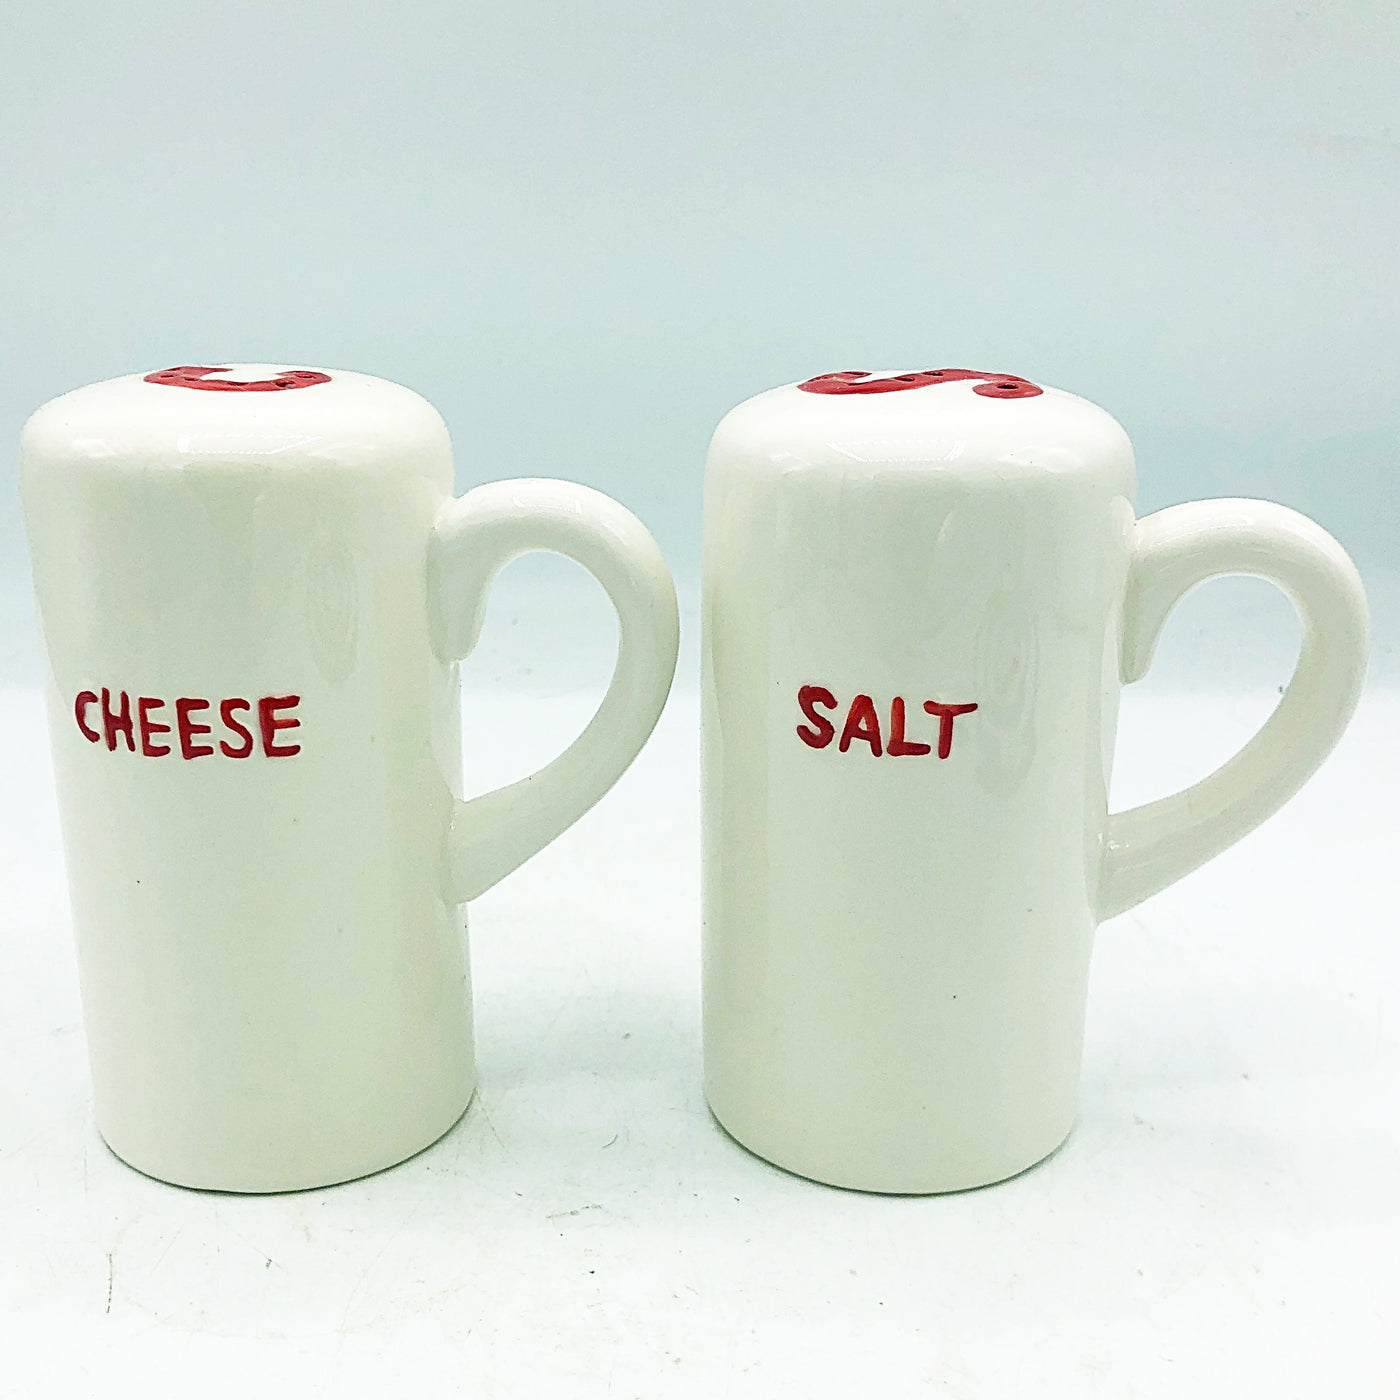 💙 Salt and Cheese Popcorn Shakers Tall Red and White Set of 2